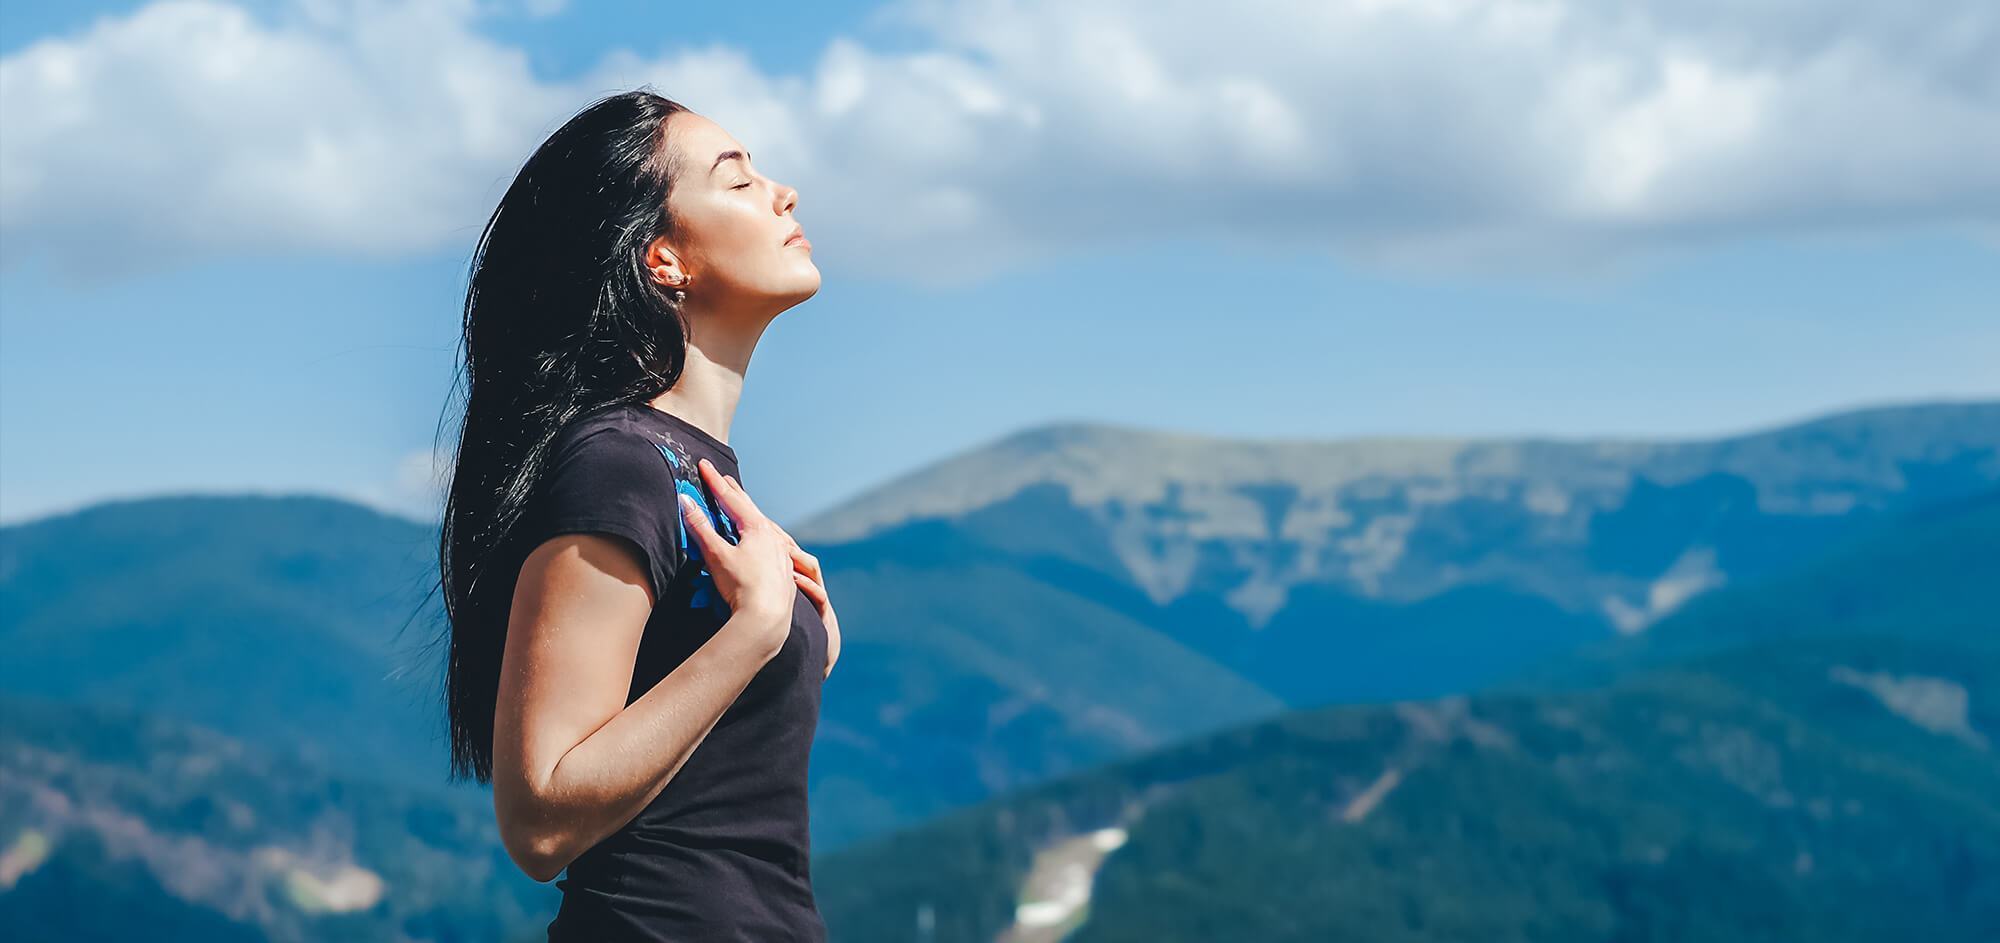 ZQuiet Breathe improves breathing to help prevent illness. Learn how.